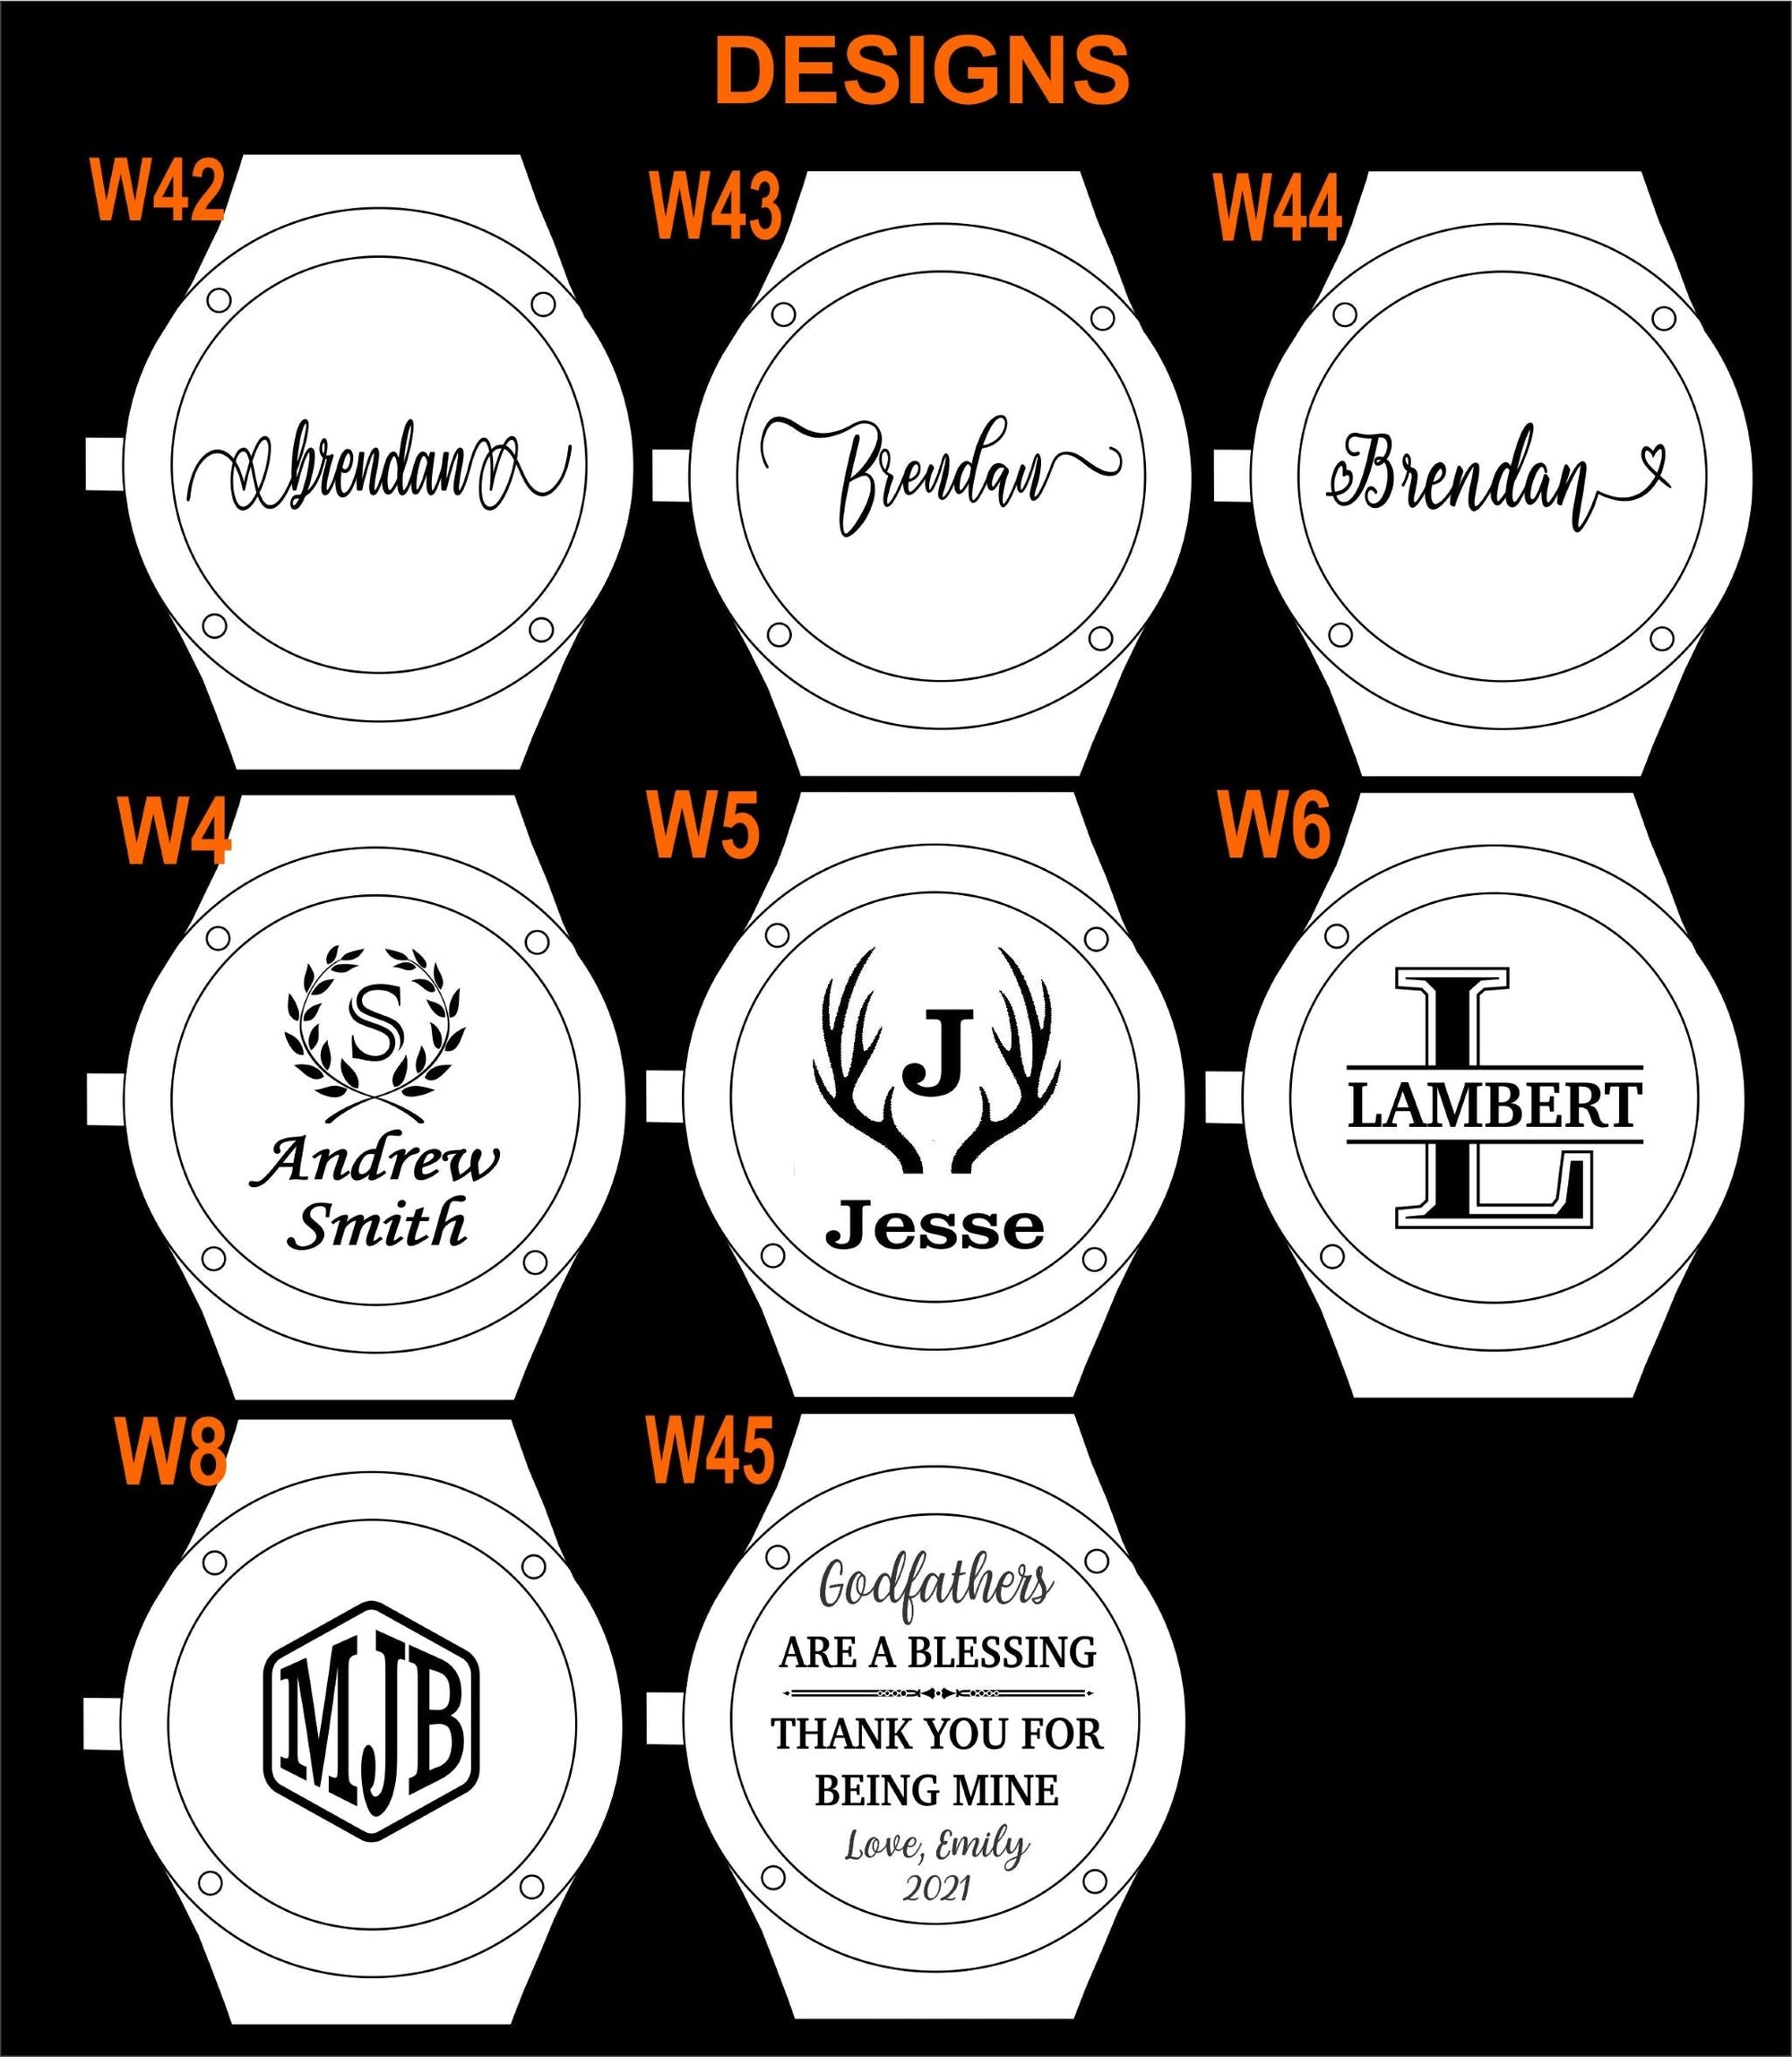 Engraved Watches for Men | Custom Wood Watch